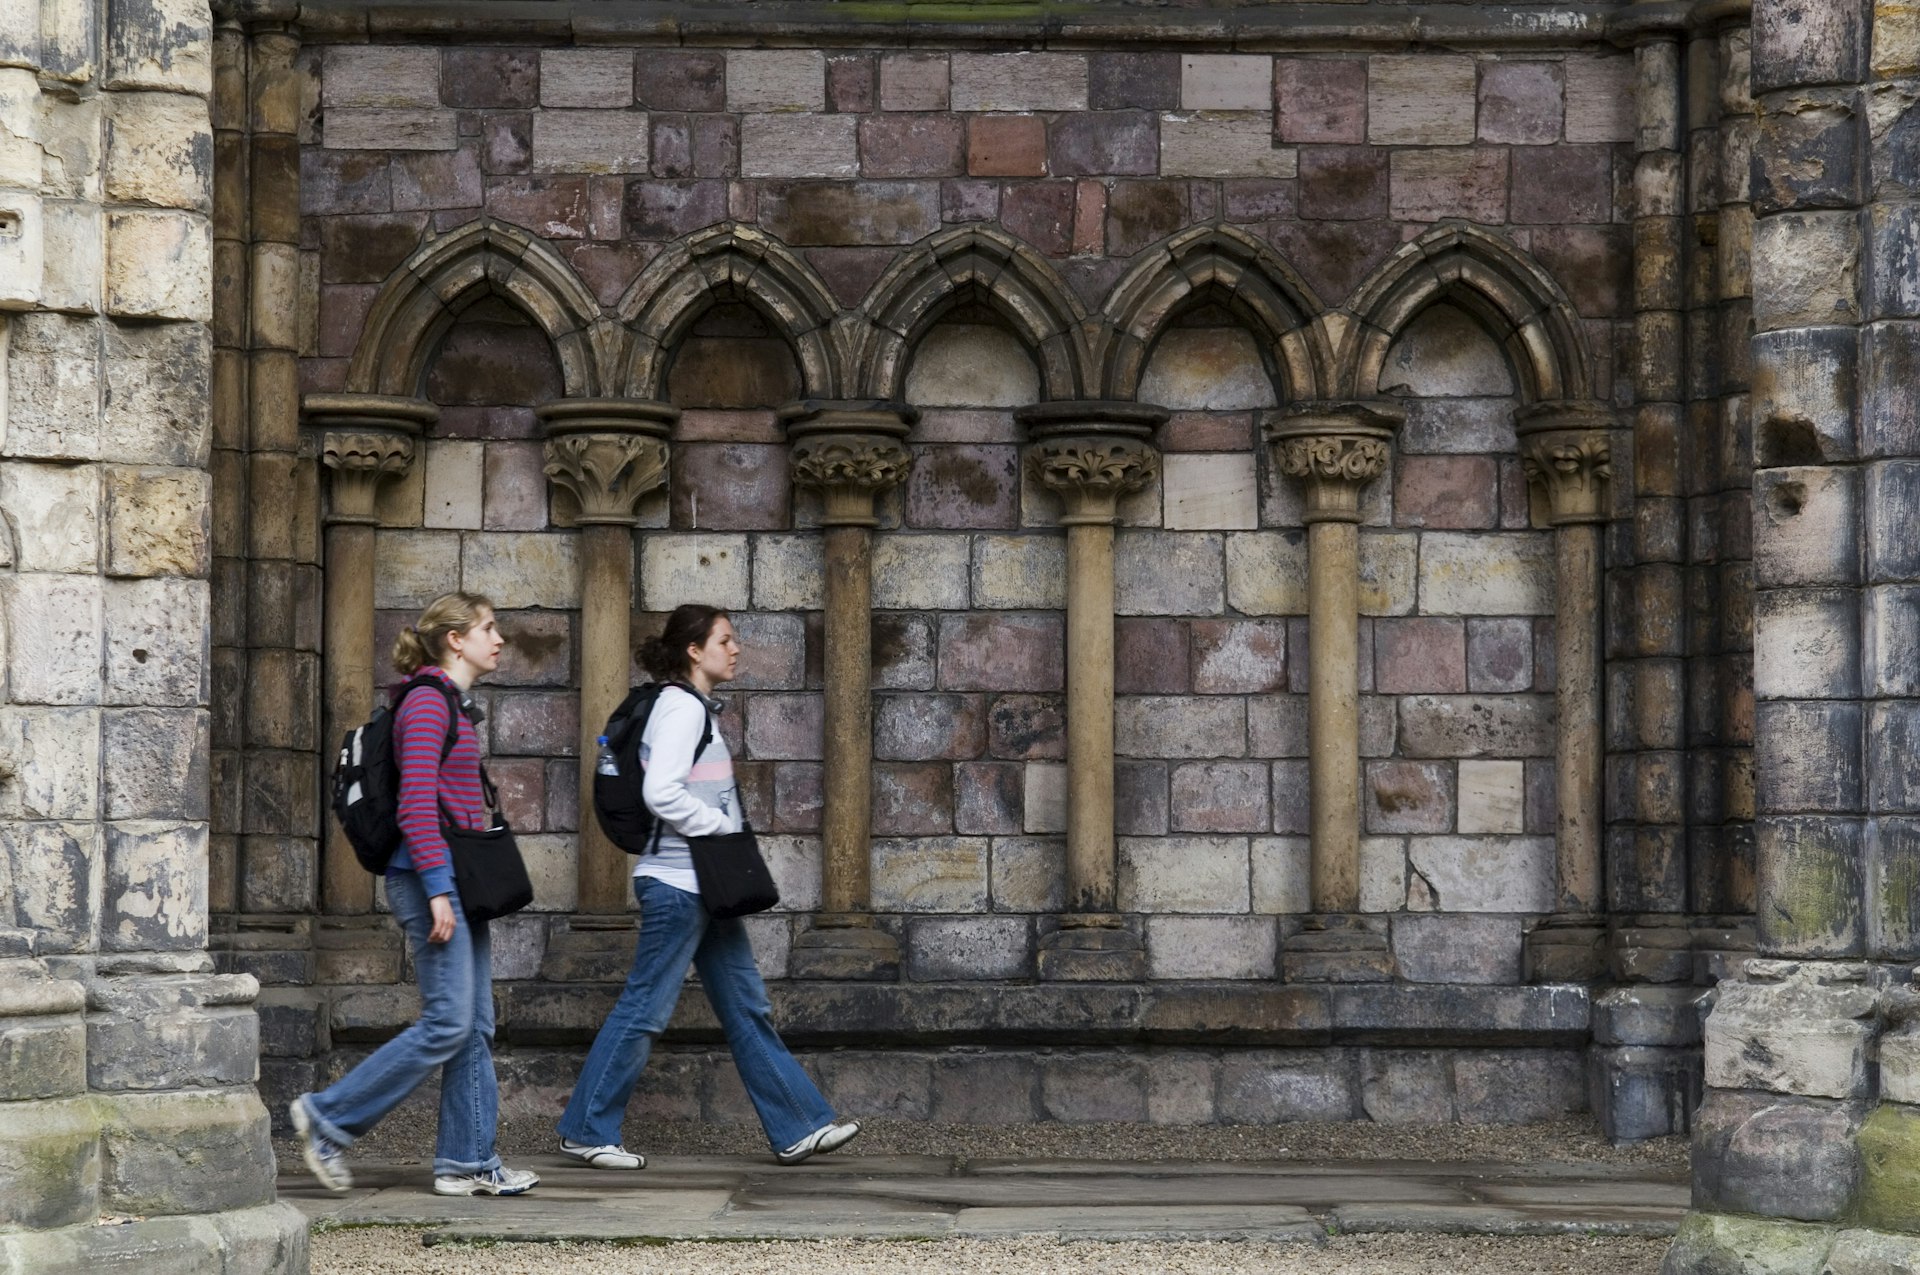 Two women walking in Holyrood Abbey at Palace of Holyroodhouse, Holyrood district.